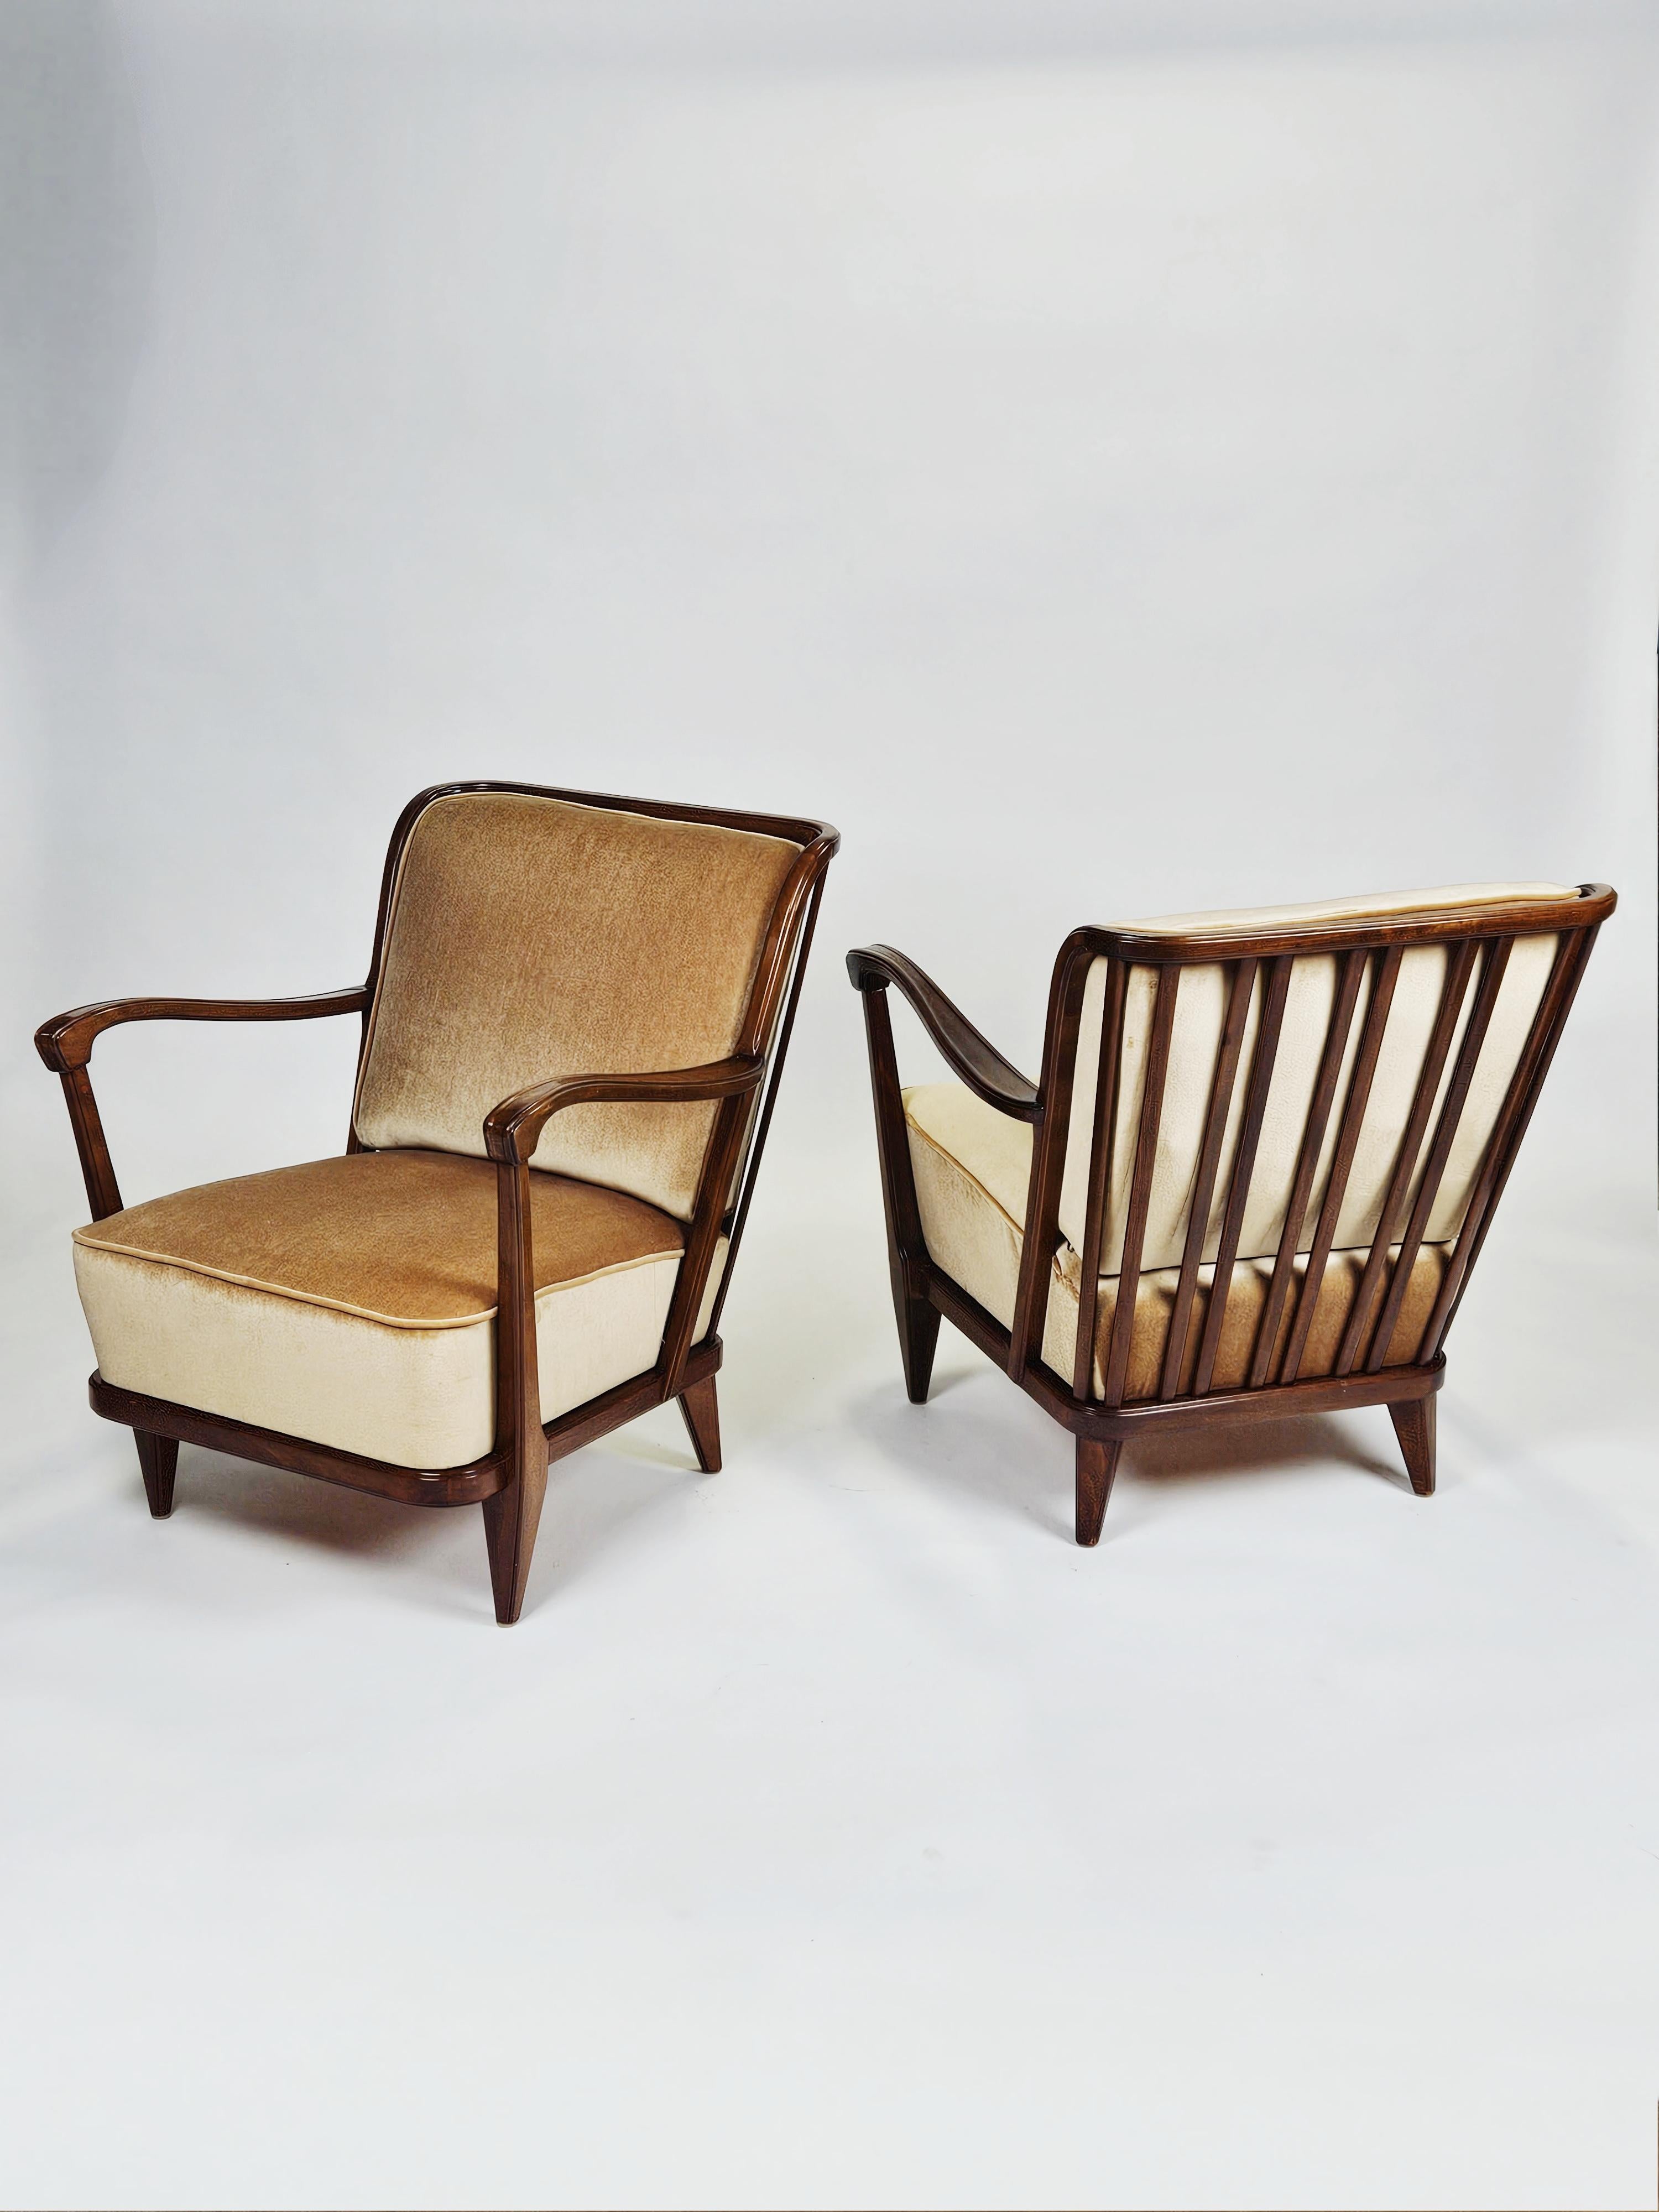 Elegant armchairs designed by Svante Skogh and produced by AB Förenade Möbelfabrikerna Linköping, Sweden, during the 1950s. 

Made in beech with original fabric still in good condition. 